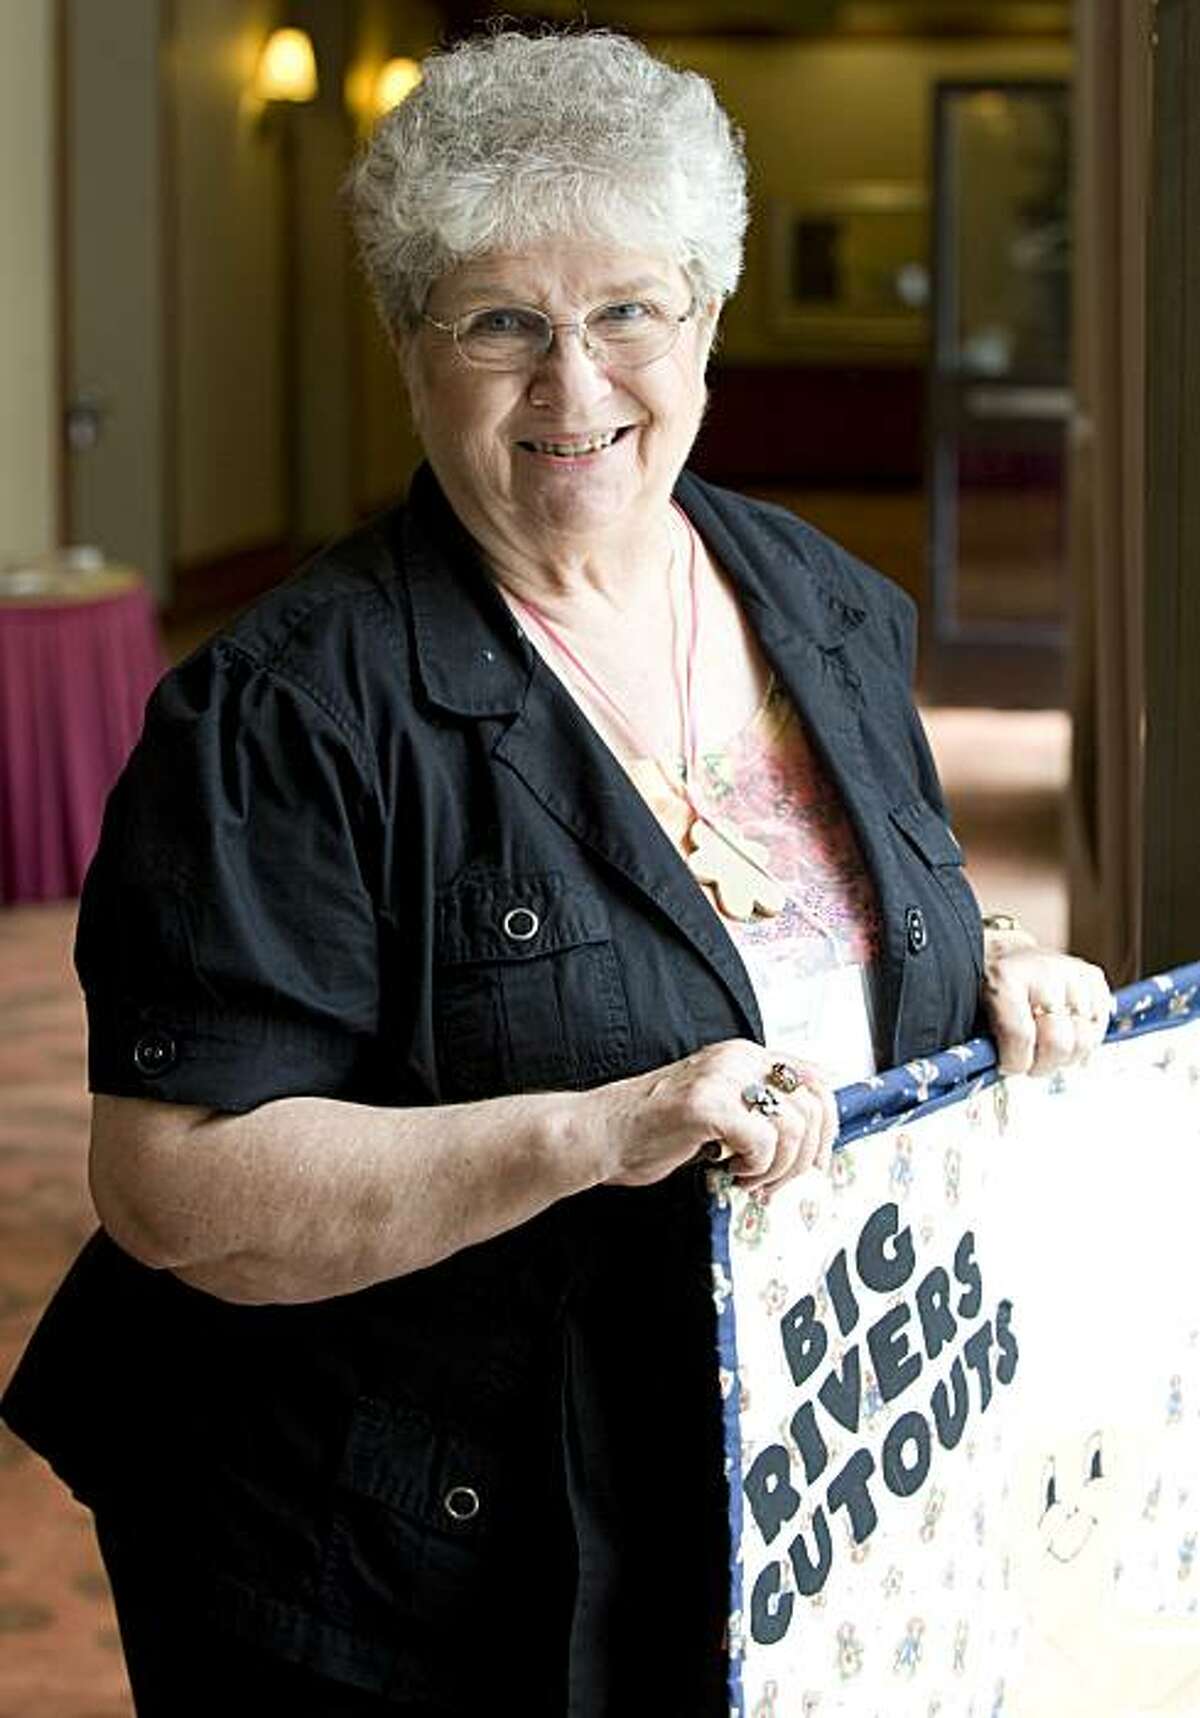 Joyce Moorhouse of Cannon Falls, Minn., stands for a portrait and holds the banner that she made to represent her chapter of the Cookie Cutter Collectors' Club during the Cookie Cutter Collectors' Club 2010 Convention at the Double Tree Hotel in Burlingame, Calif., on Thursday, June 24, 2010.